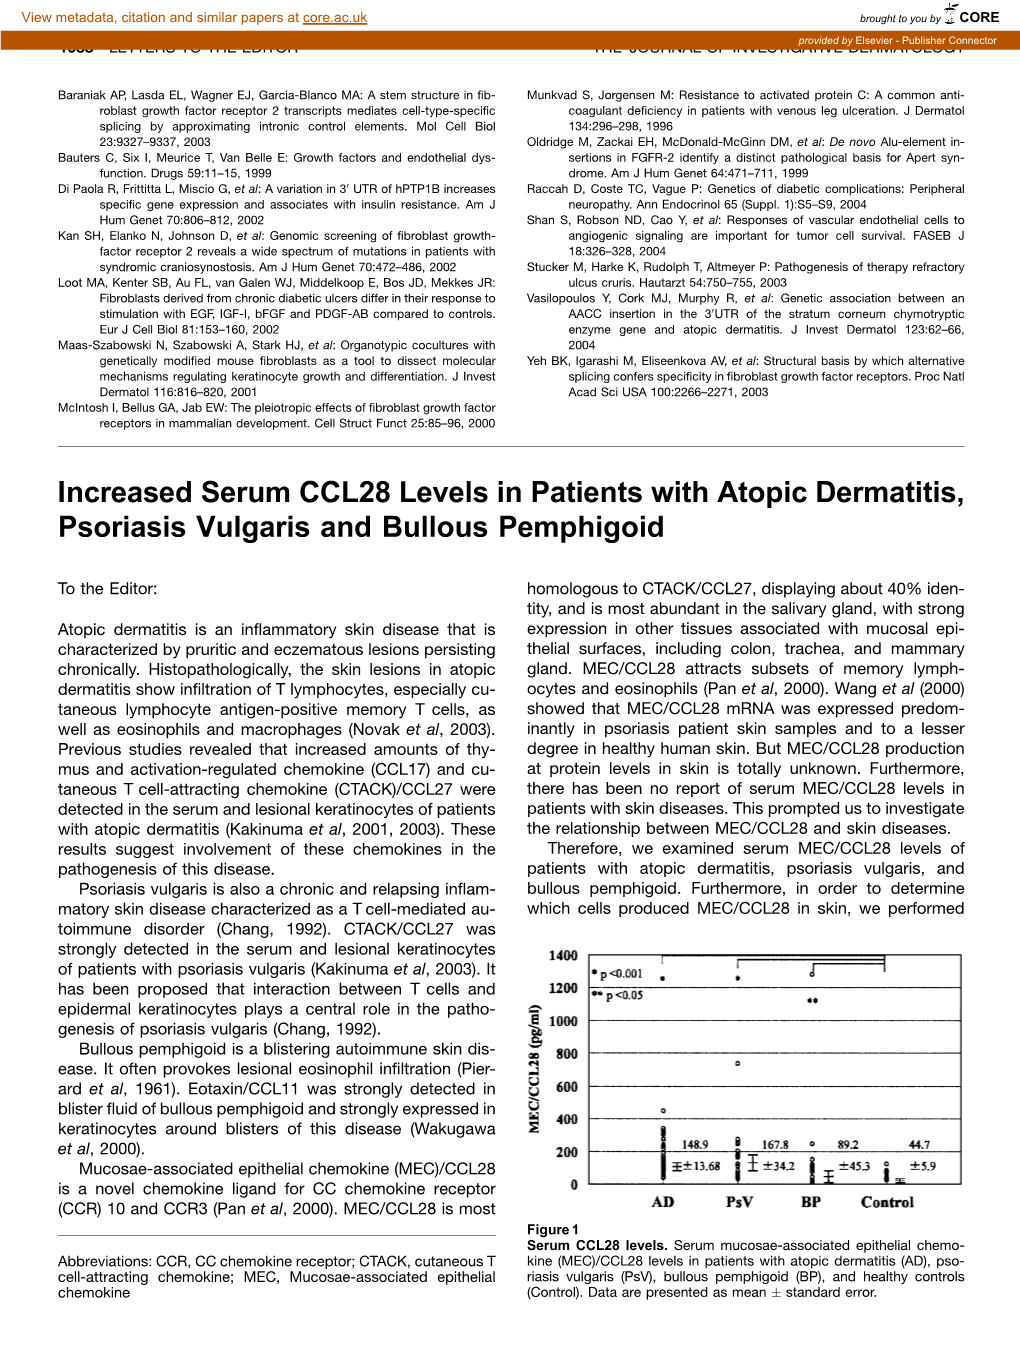 Increased Serum CCL28 Levels in Patients with Atopic Dermatitis, Psoriasis Vulgaris and Bullous Pemphigoid